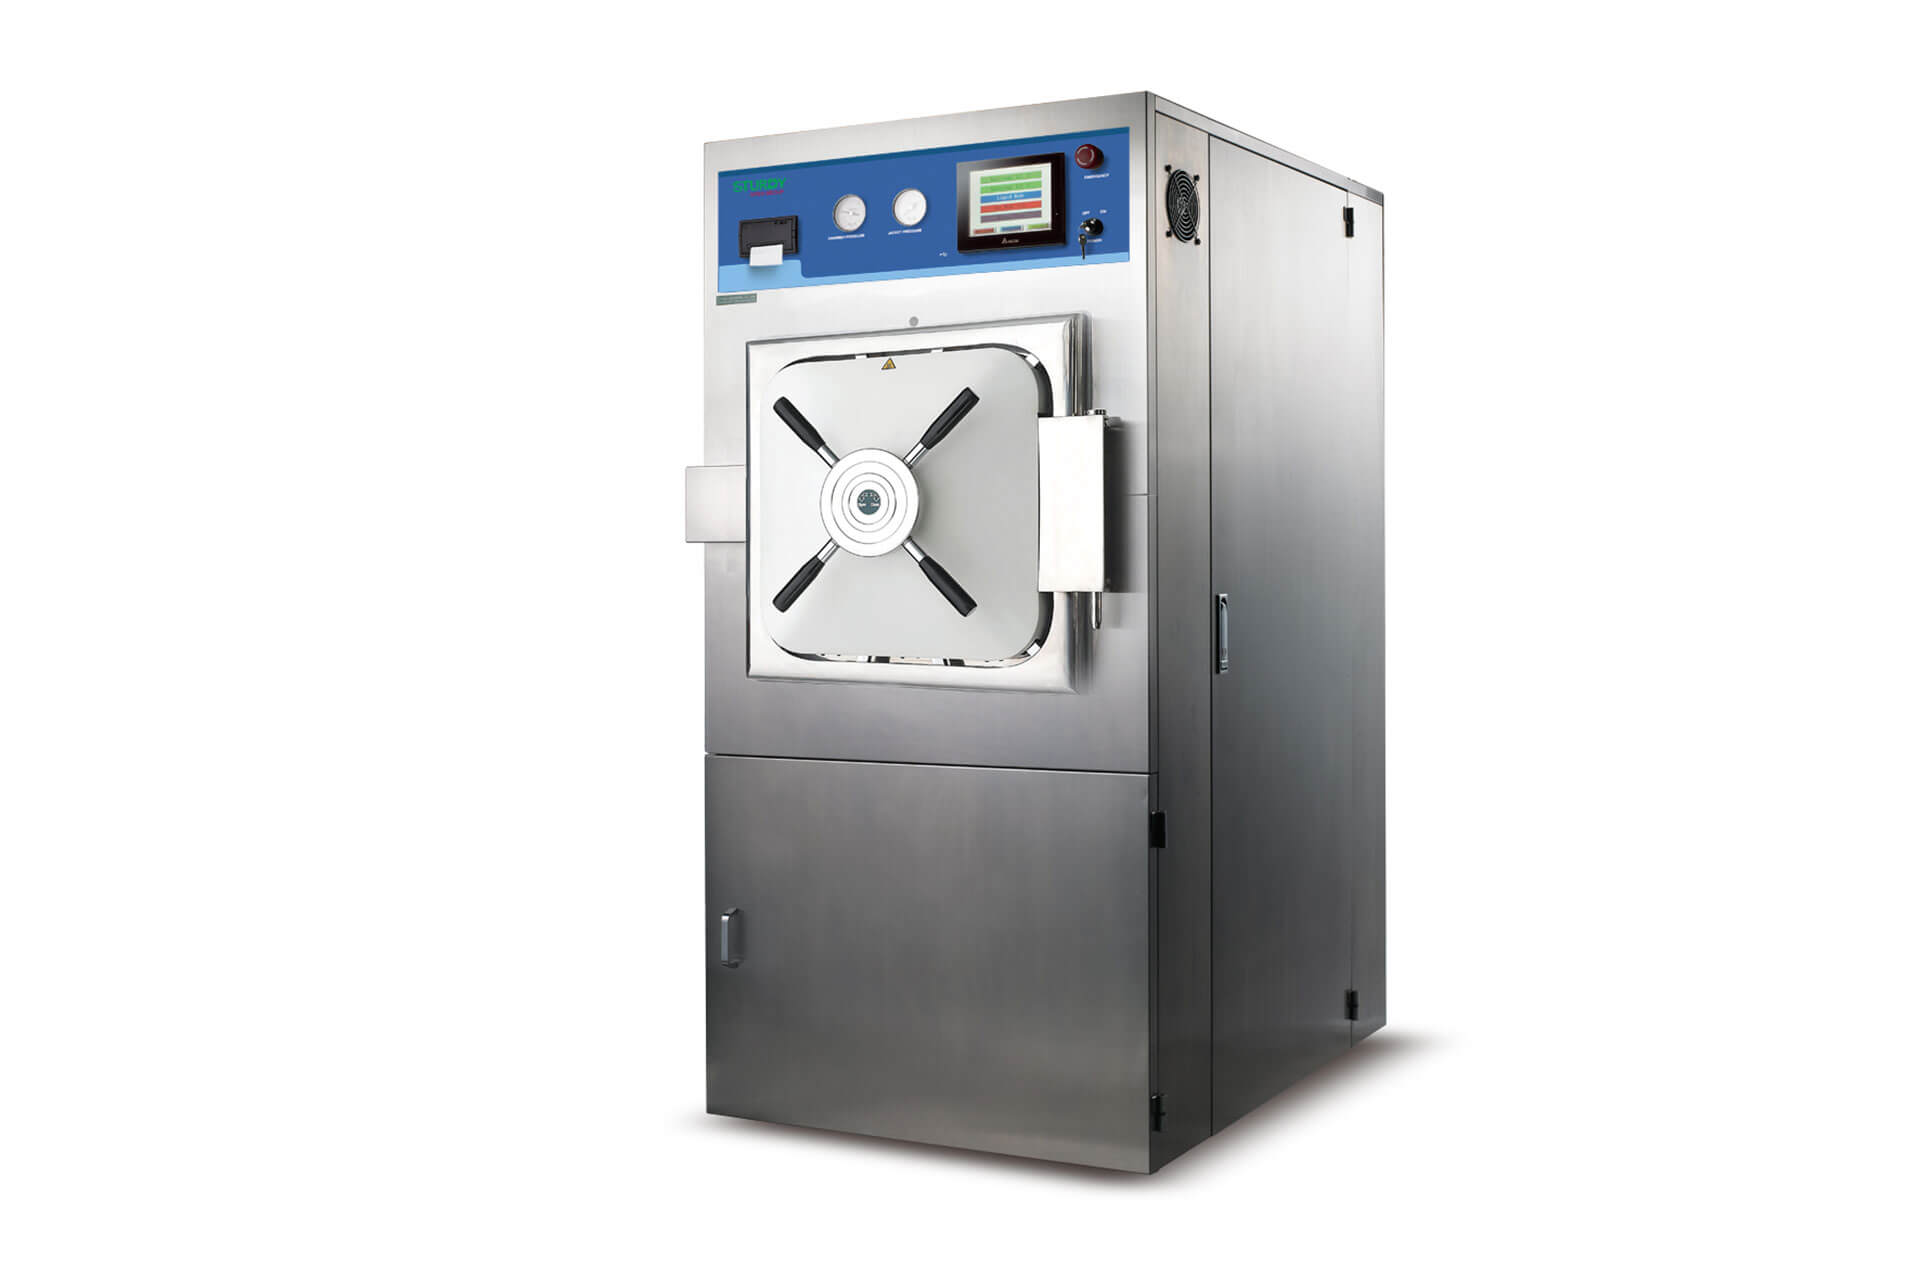 HP Large Autoclave (Square Chamber) - Sturdy